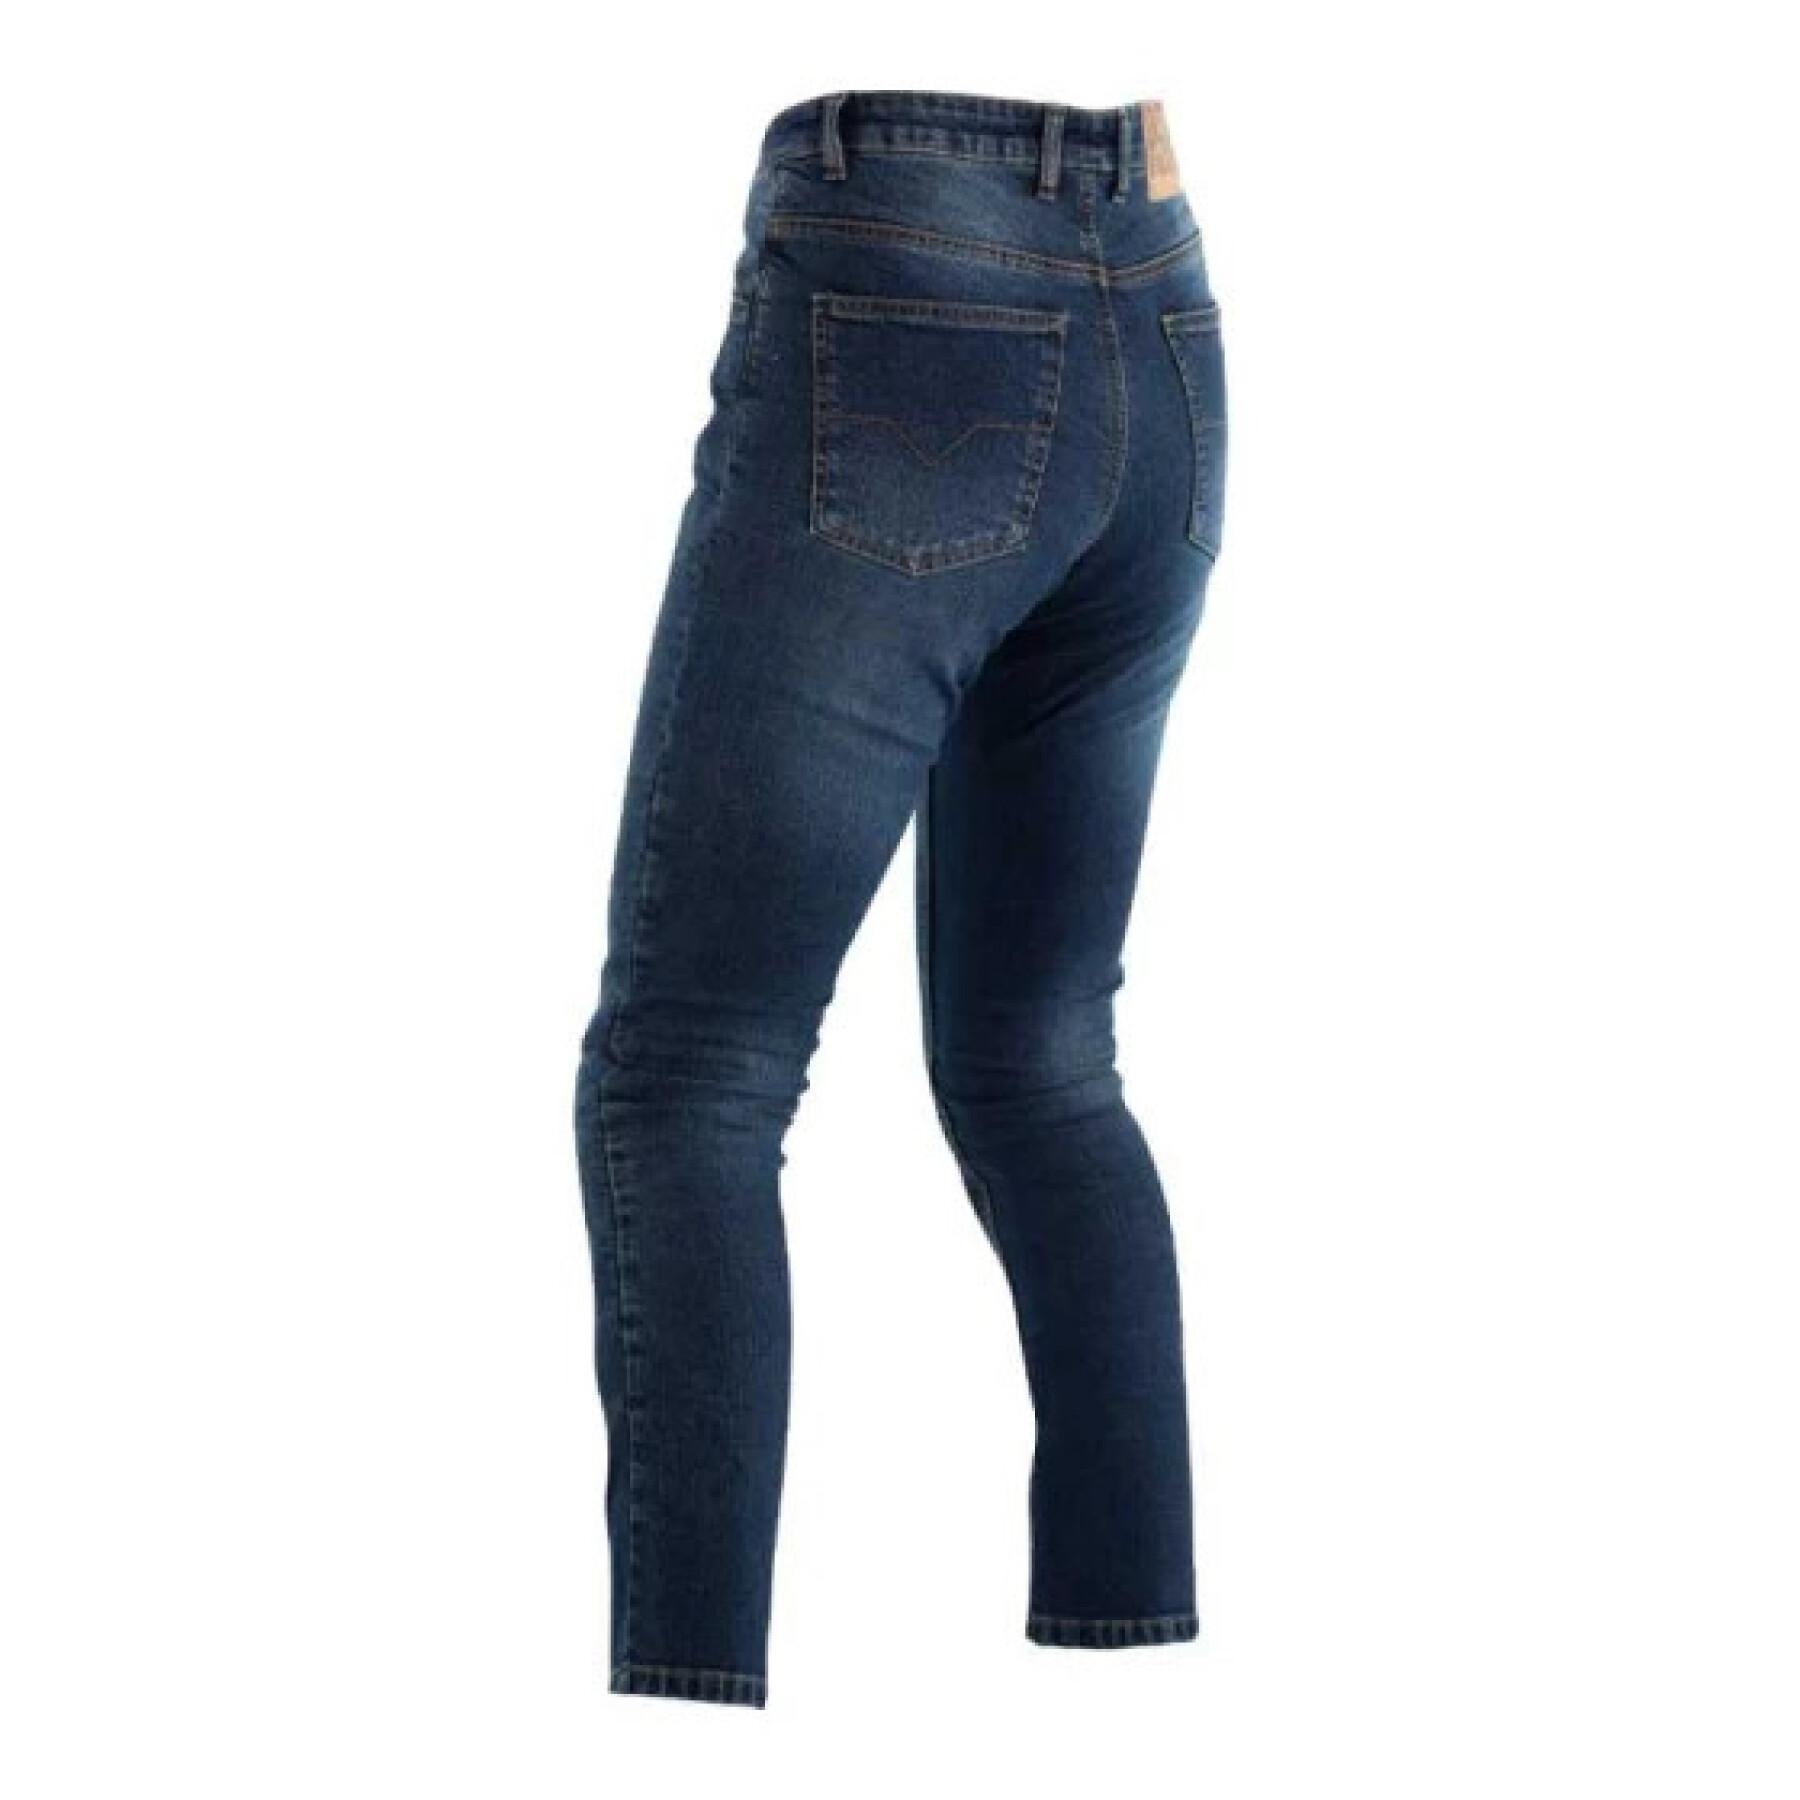 Jeans moto court donna tessuto rinforzato RST Kevlar® Tapered-Fit CE